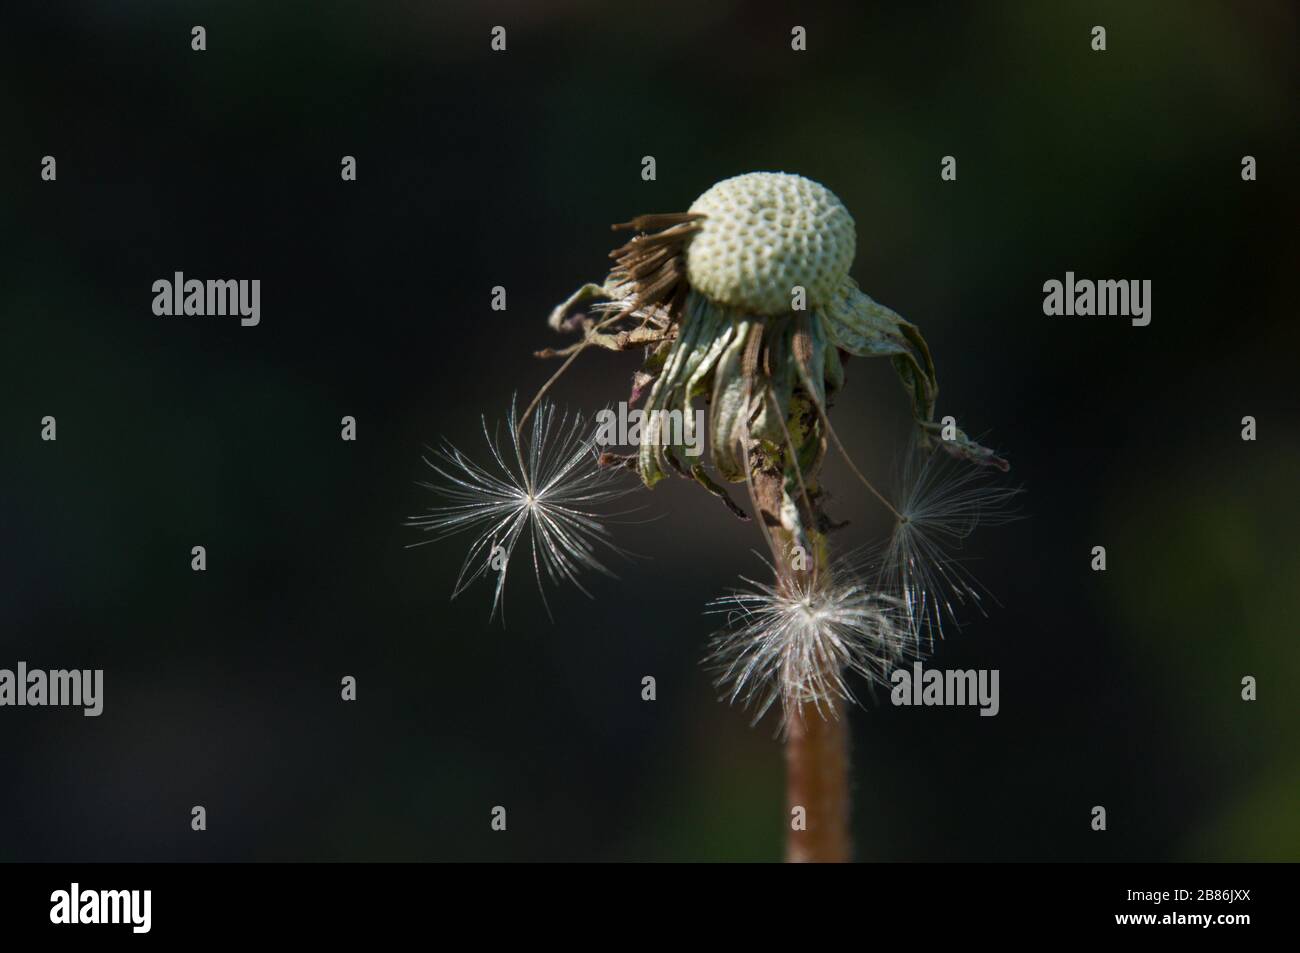 Dandelion with some fluff and seeds. Late spring. Close-up view. Stock Photo